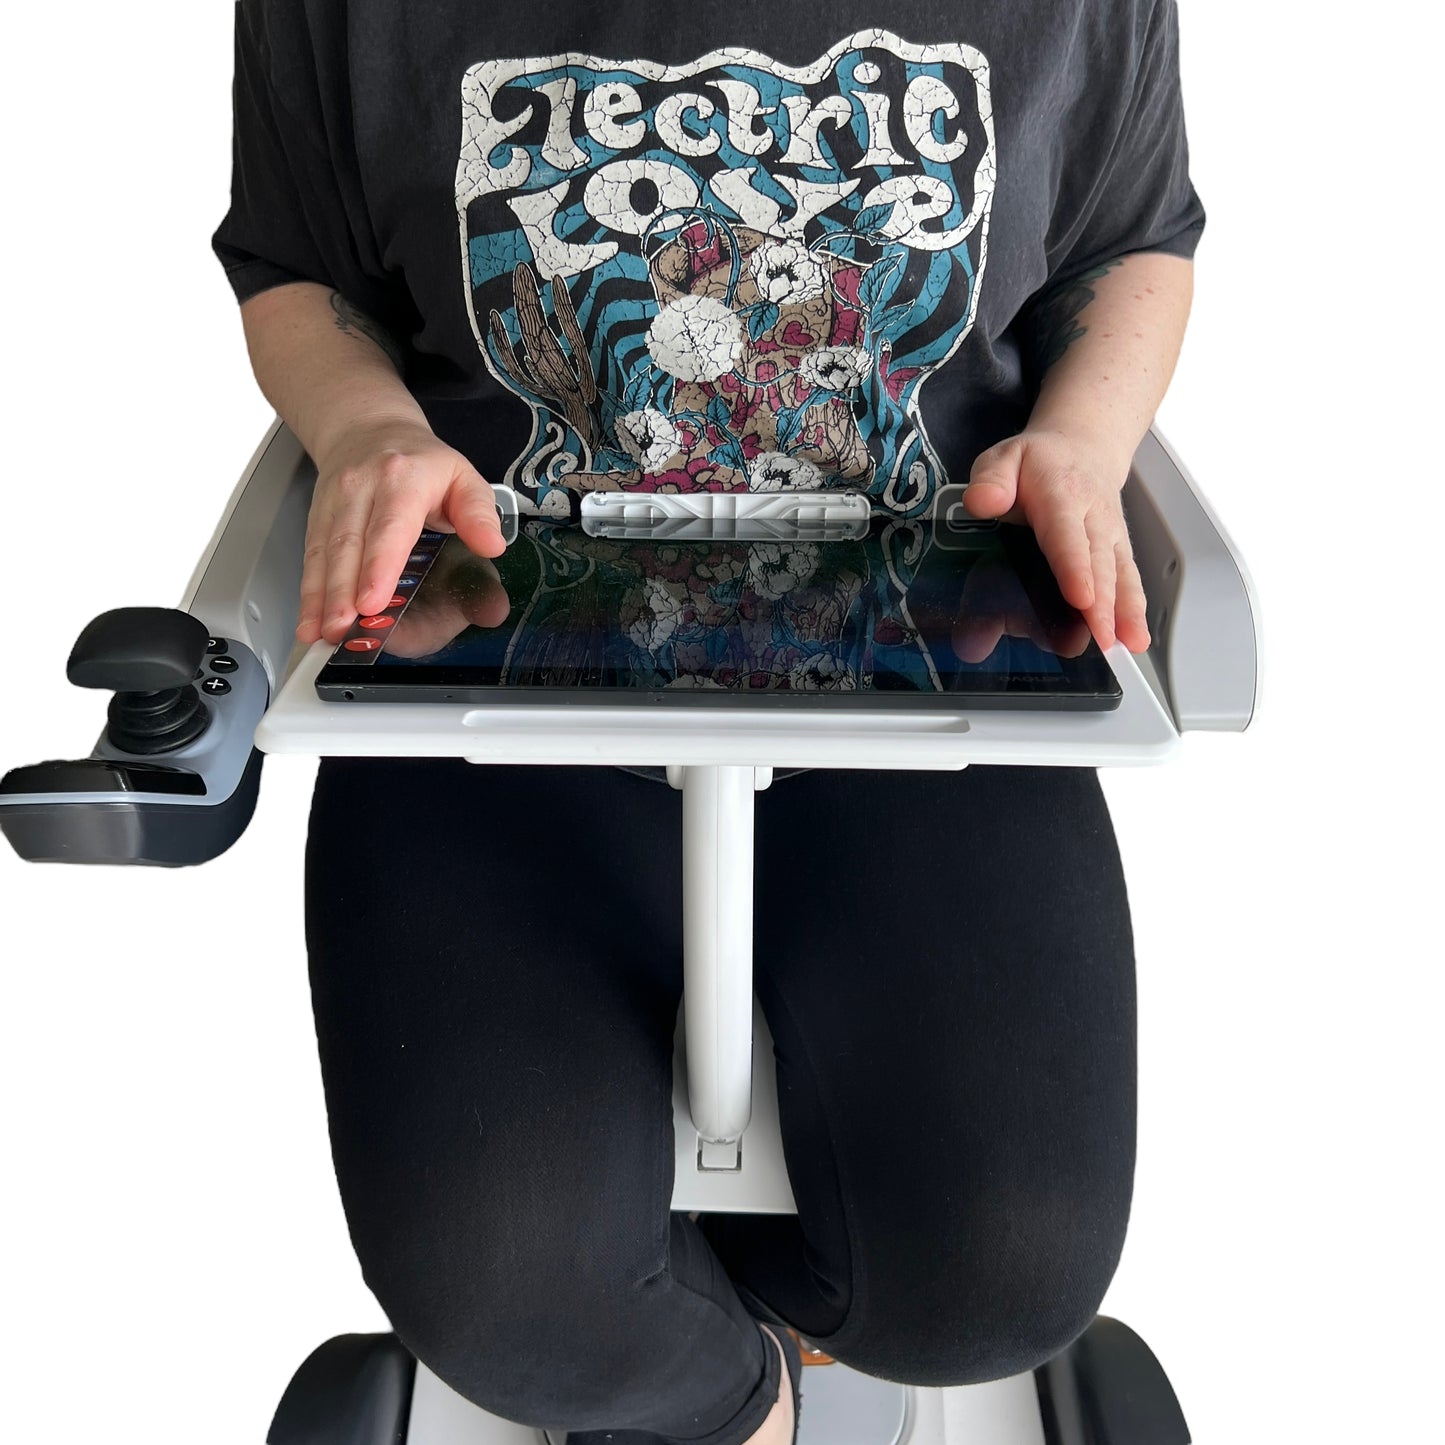 Adaptive Tablet Table Holder